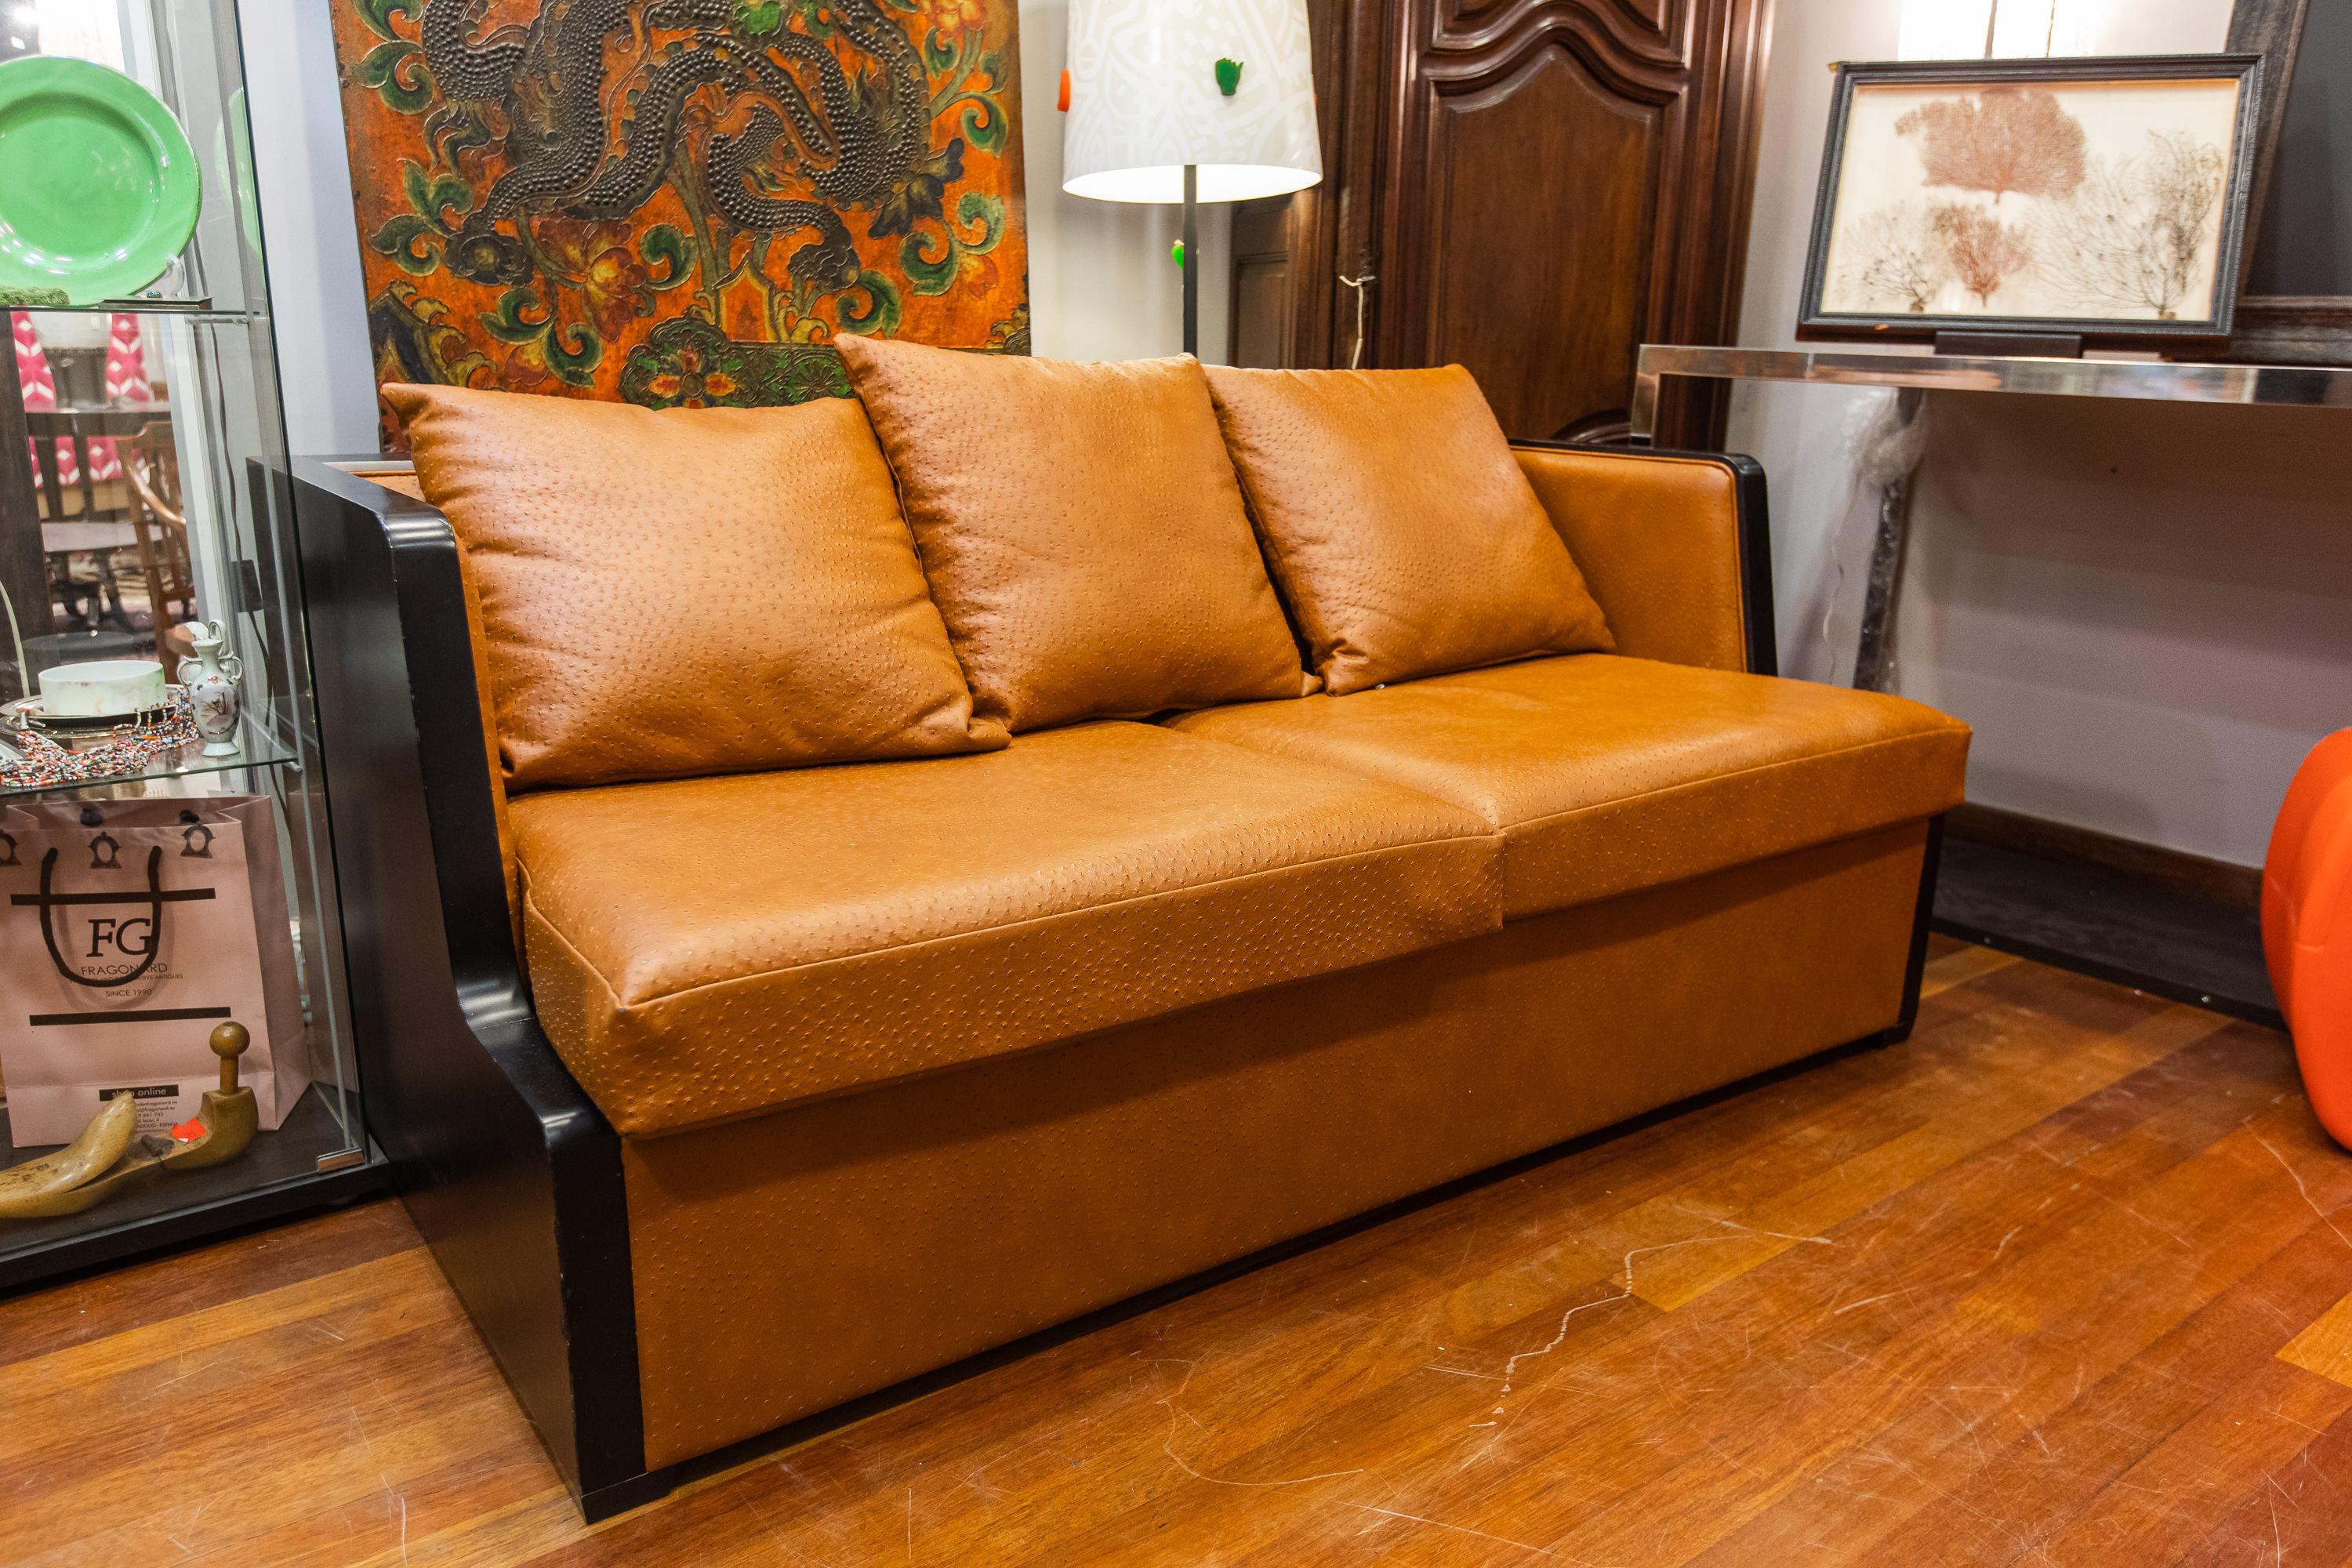 Stunning Art Deco sofa-bed by Rosello Paris, 50s.
From the Italian firm Rosello of Paris, original of the Art Deco era of the 50s of the twentieth century. Upholstered in cognac color ostrich leather preserved splendidly and with a resounding